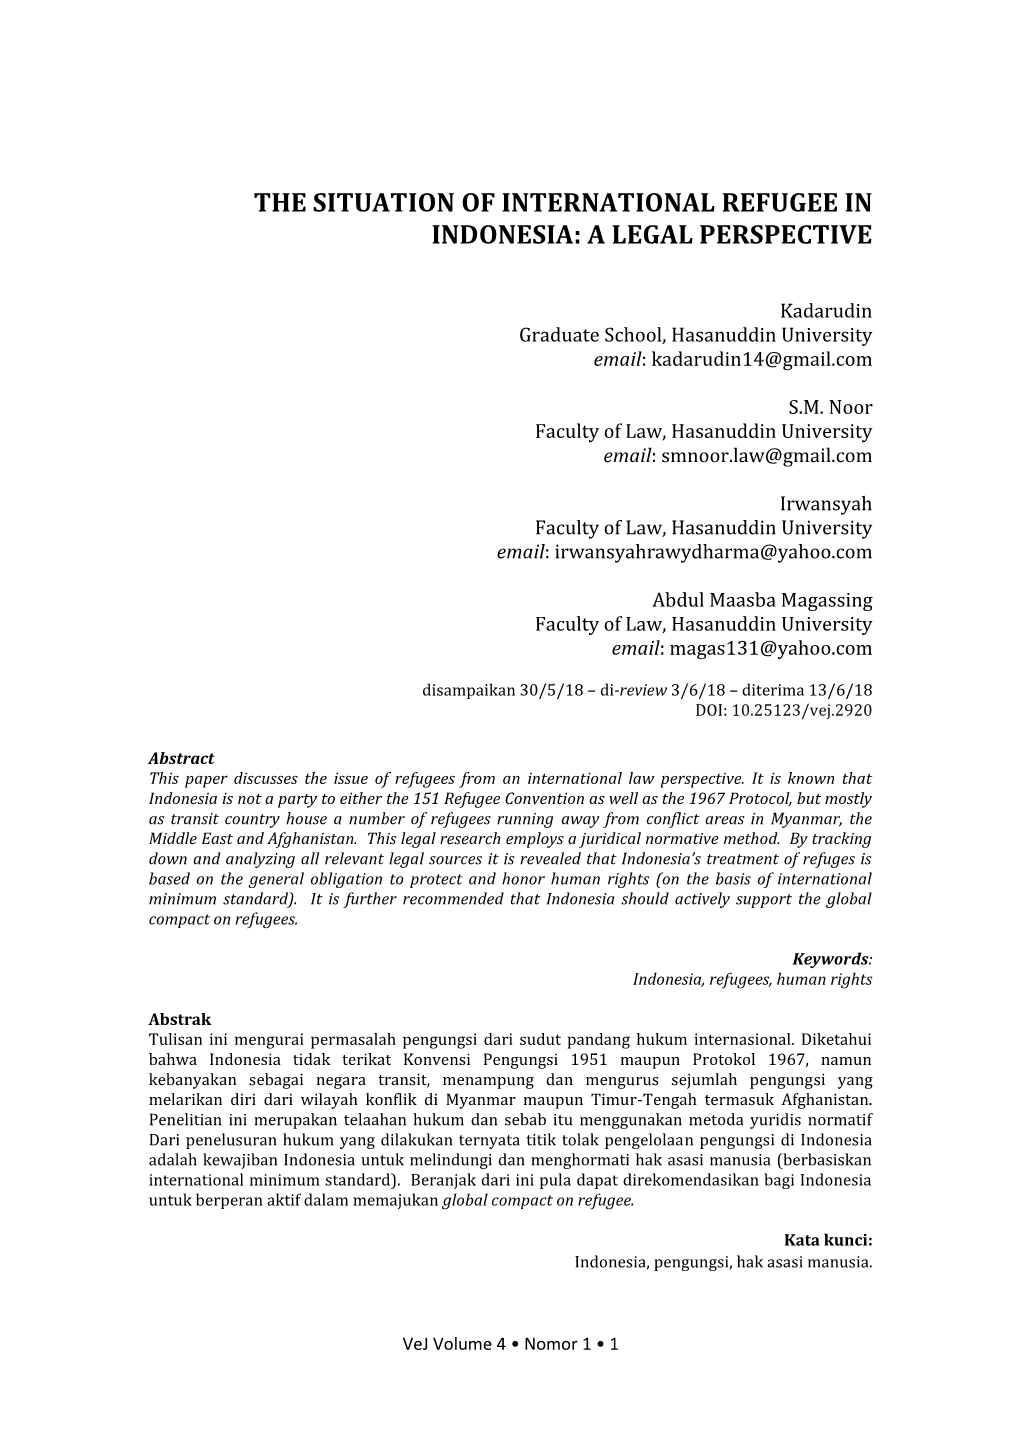 The Situation of International Refugee in Indonesia: a Legal Perspective